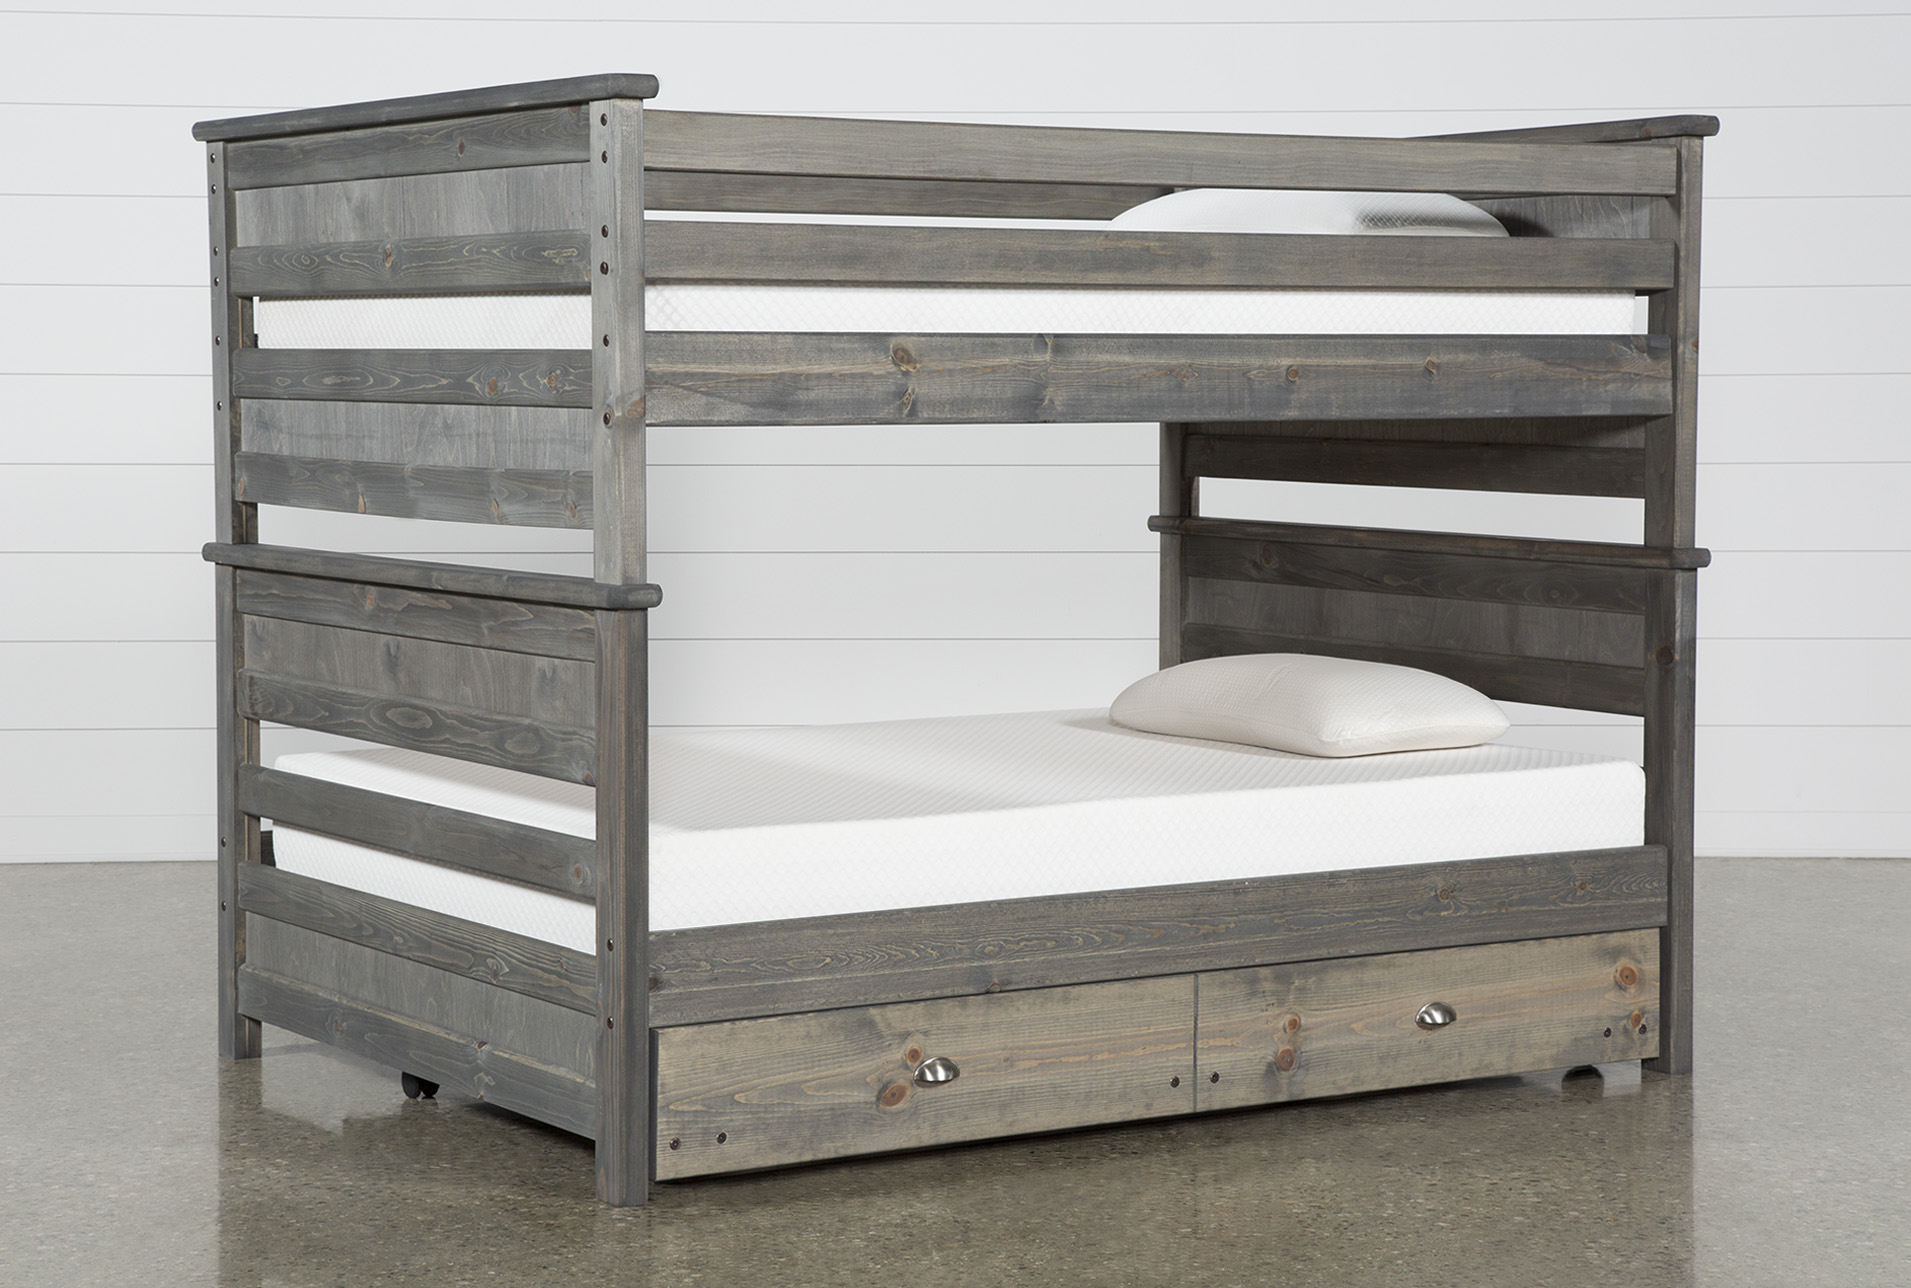 cheap bunk bed with trundle